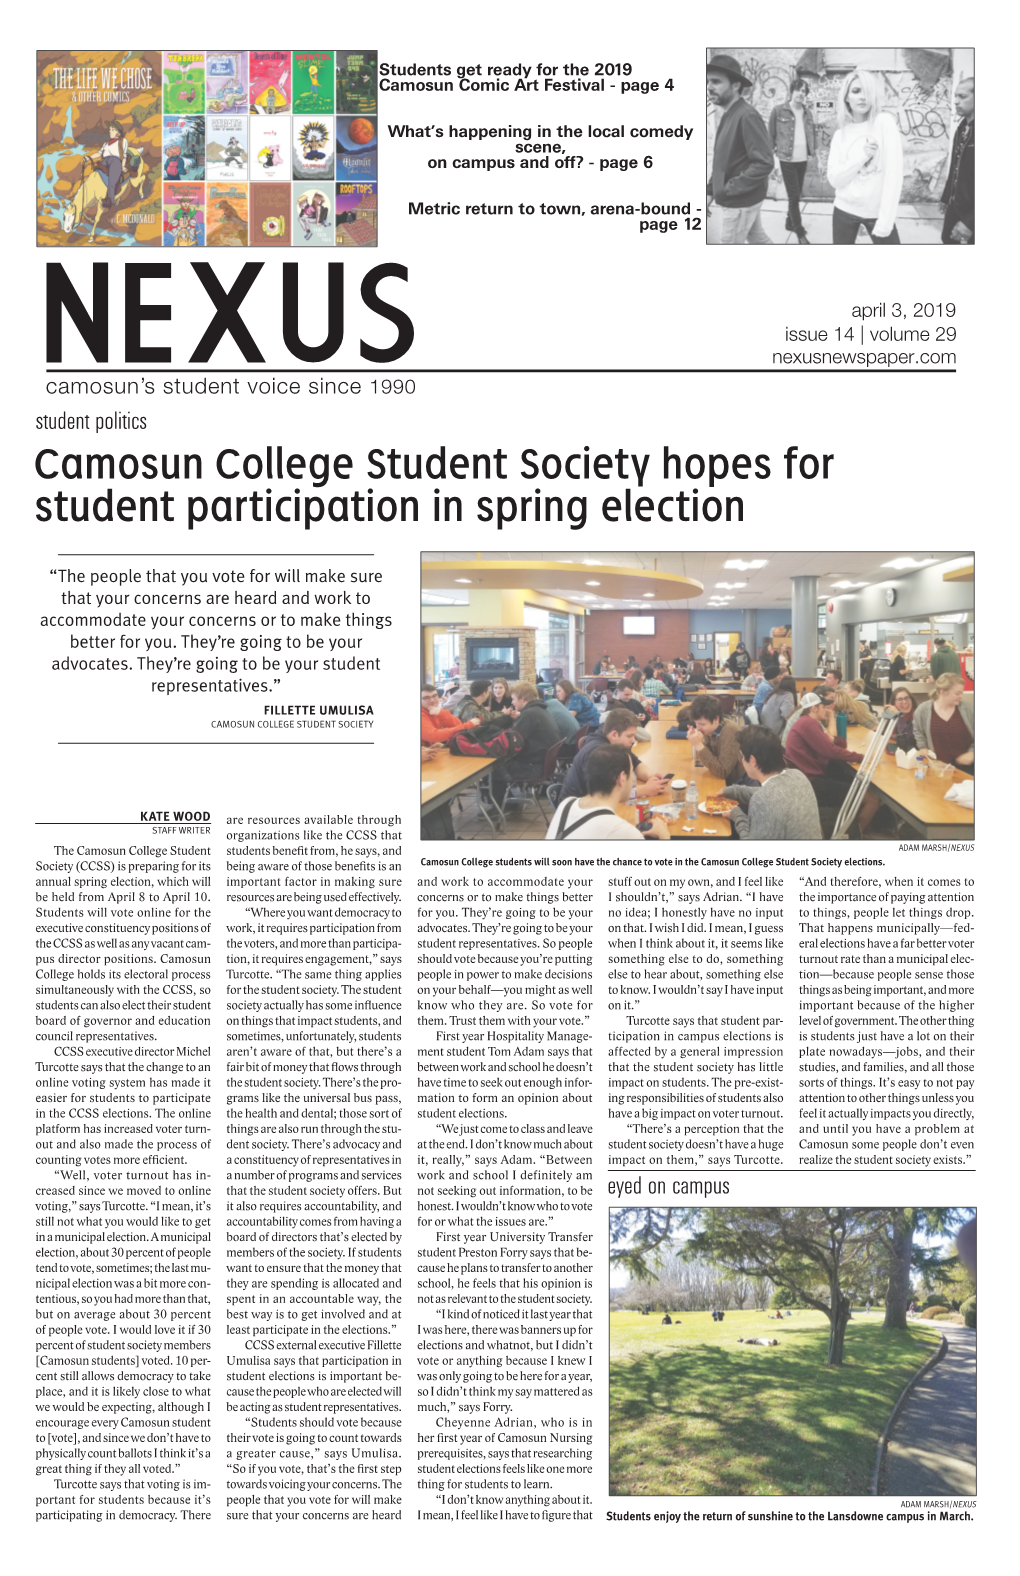 Camosun College Student Society Hopes for Student Participation in Spring Election